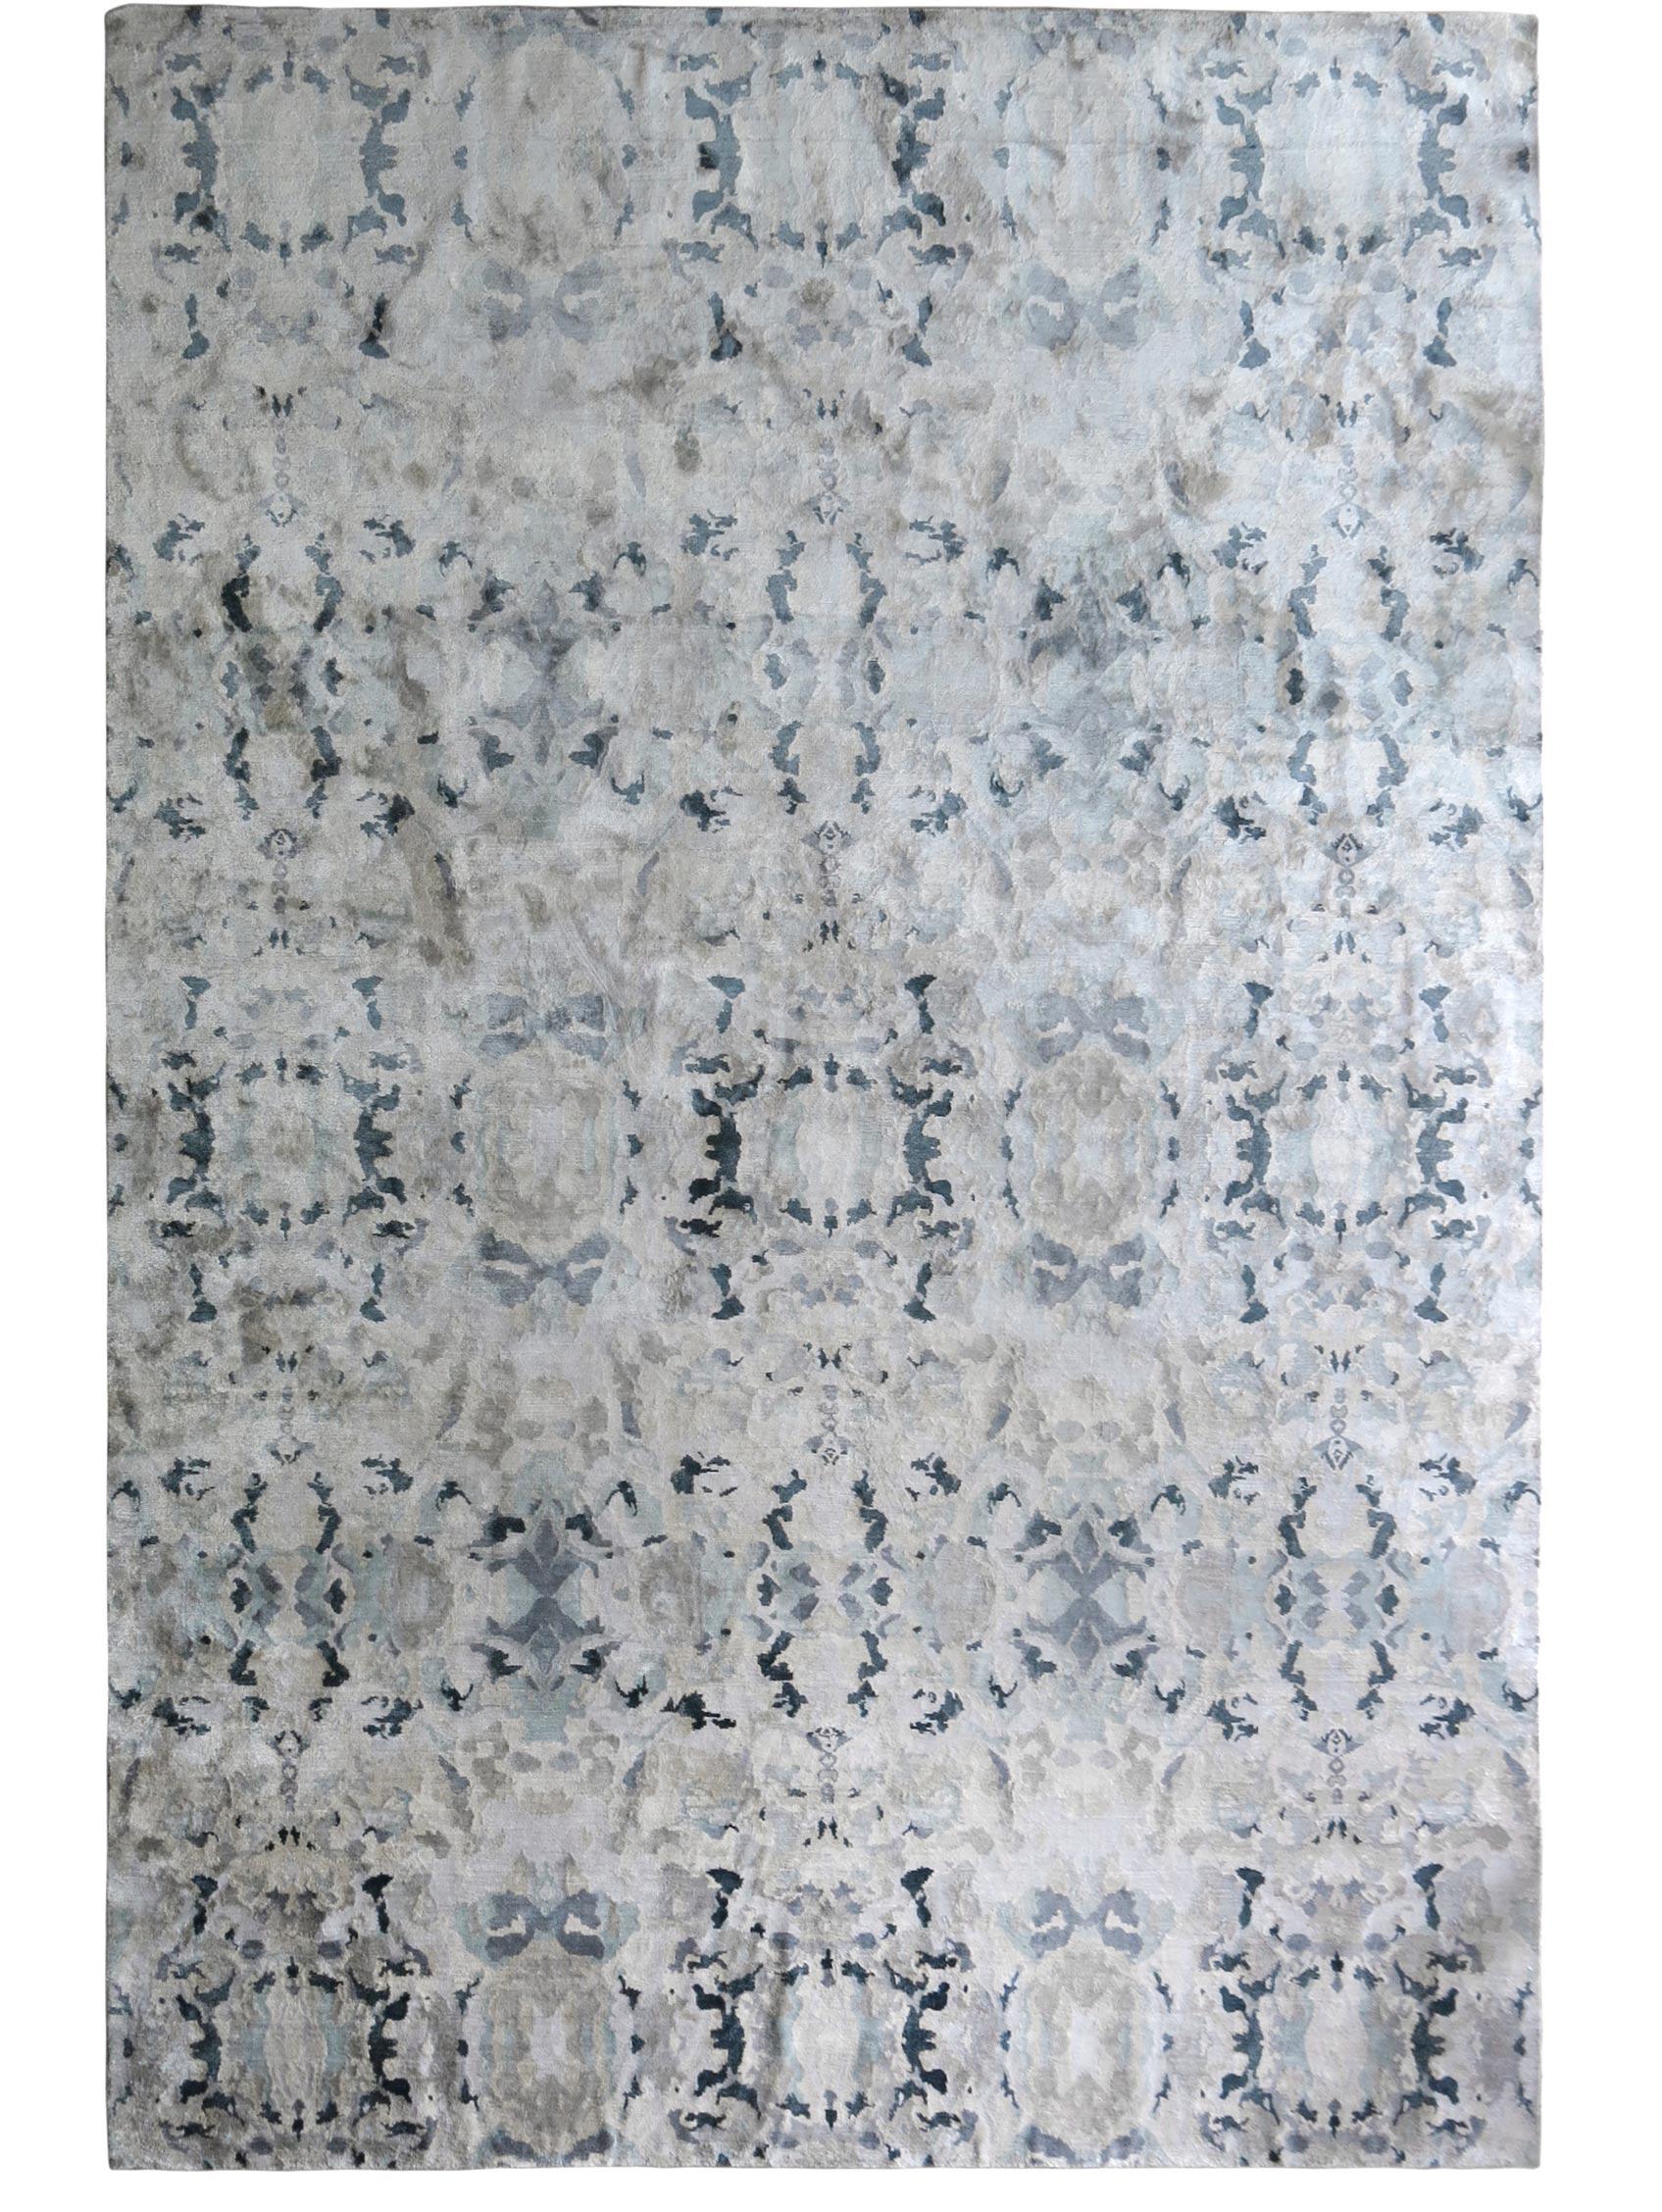 Alabaster light hand-knotted Rug by Eskayel
Dimensions: D 8' x H 10'
Pile Height: 4 mm
Materials: 100% Silk

Eskayel hand-knotted rugs are woven to order and can be customized in various sizes, colors, materials, and weave